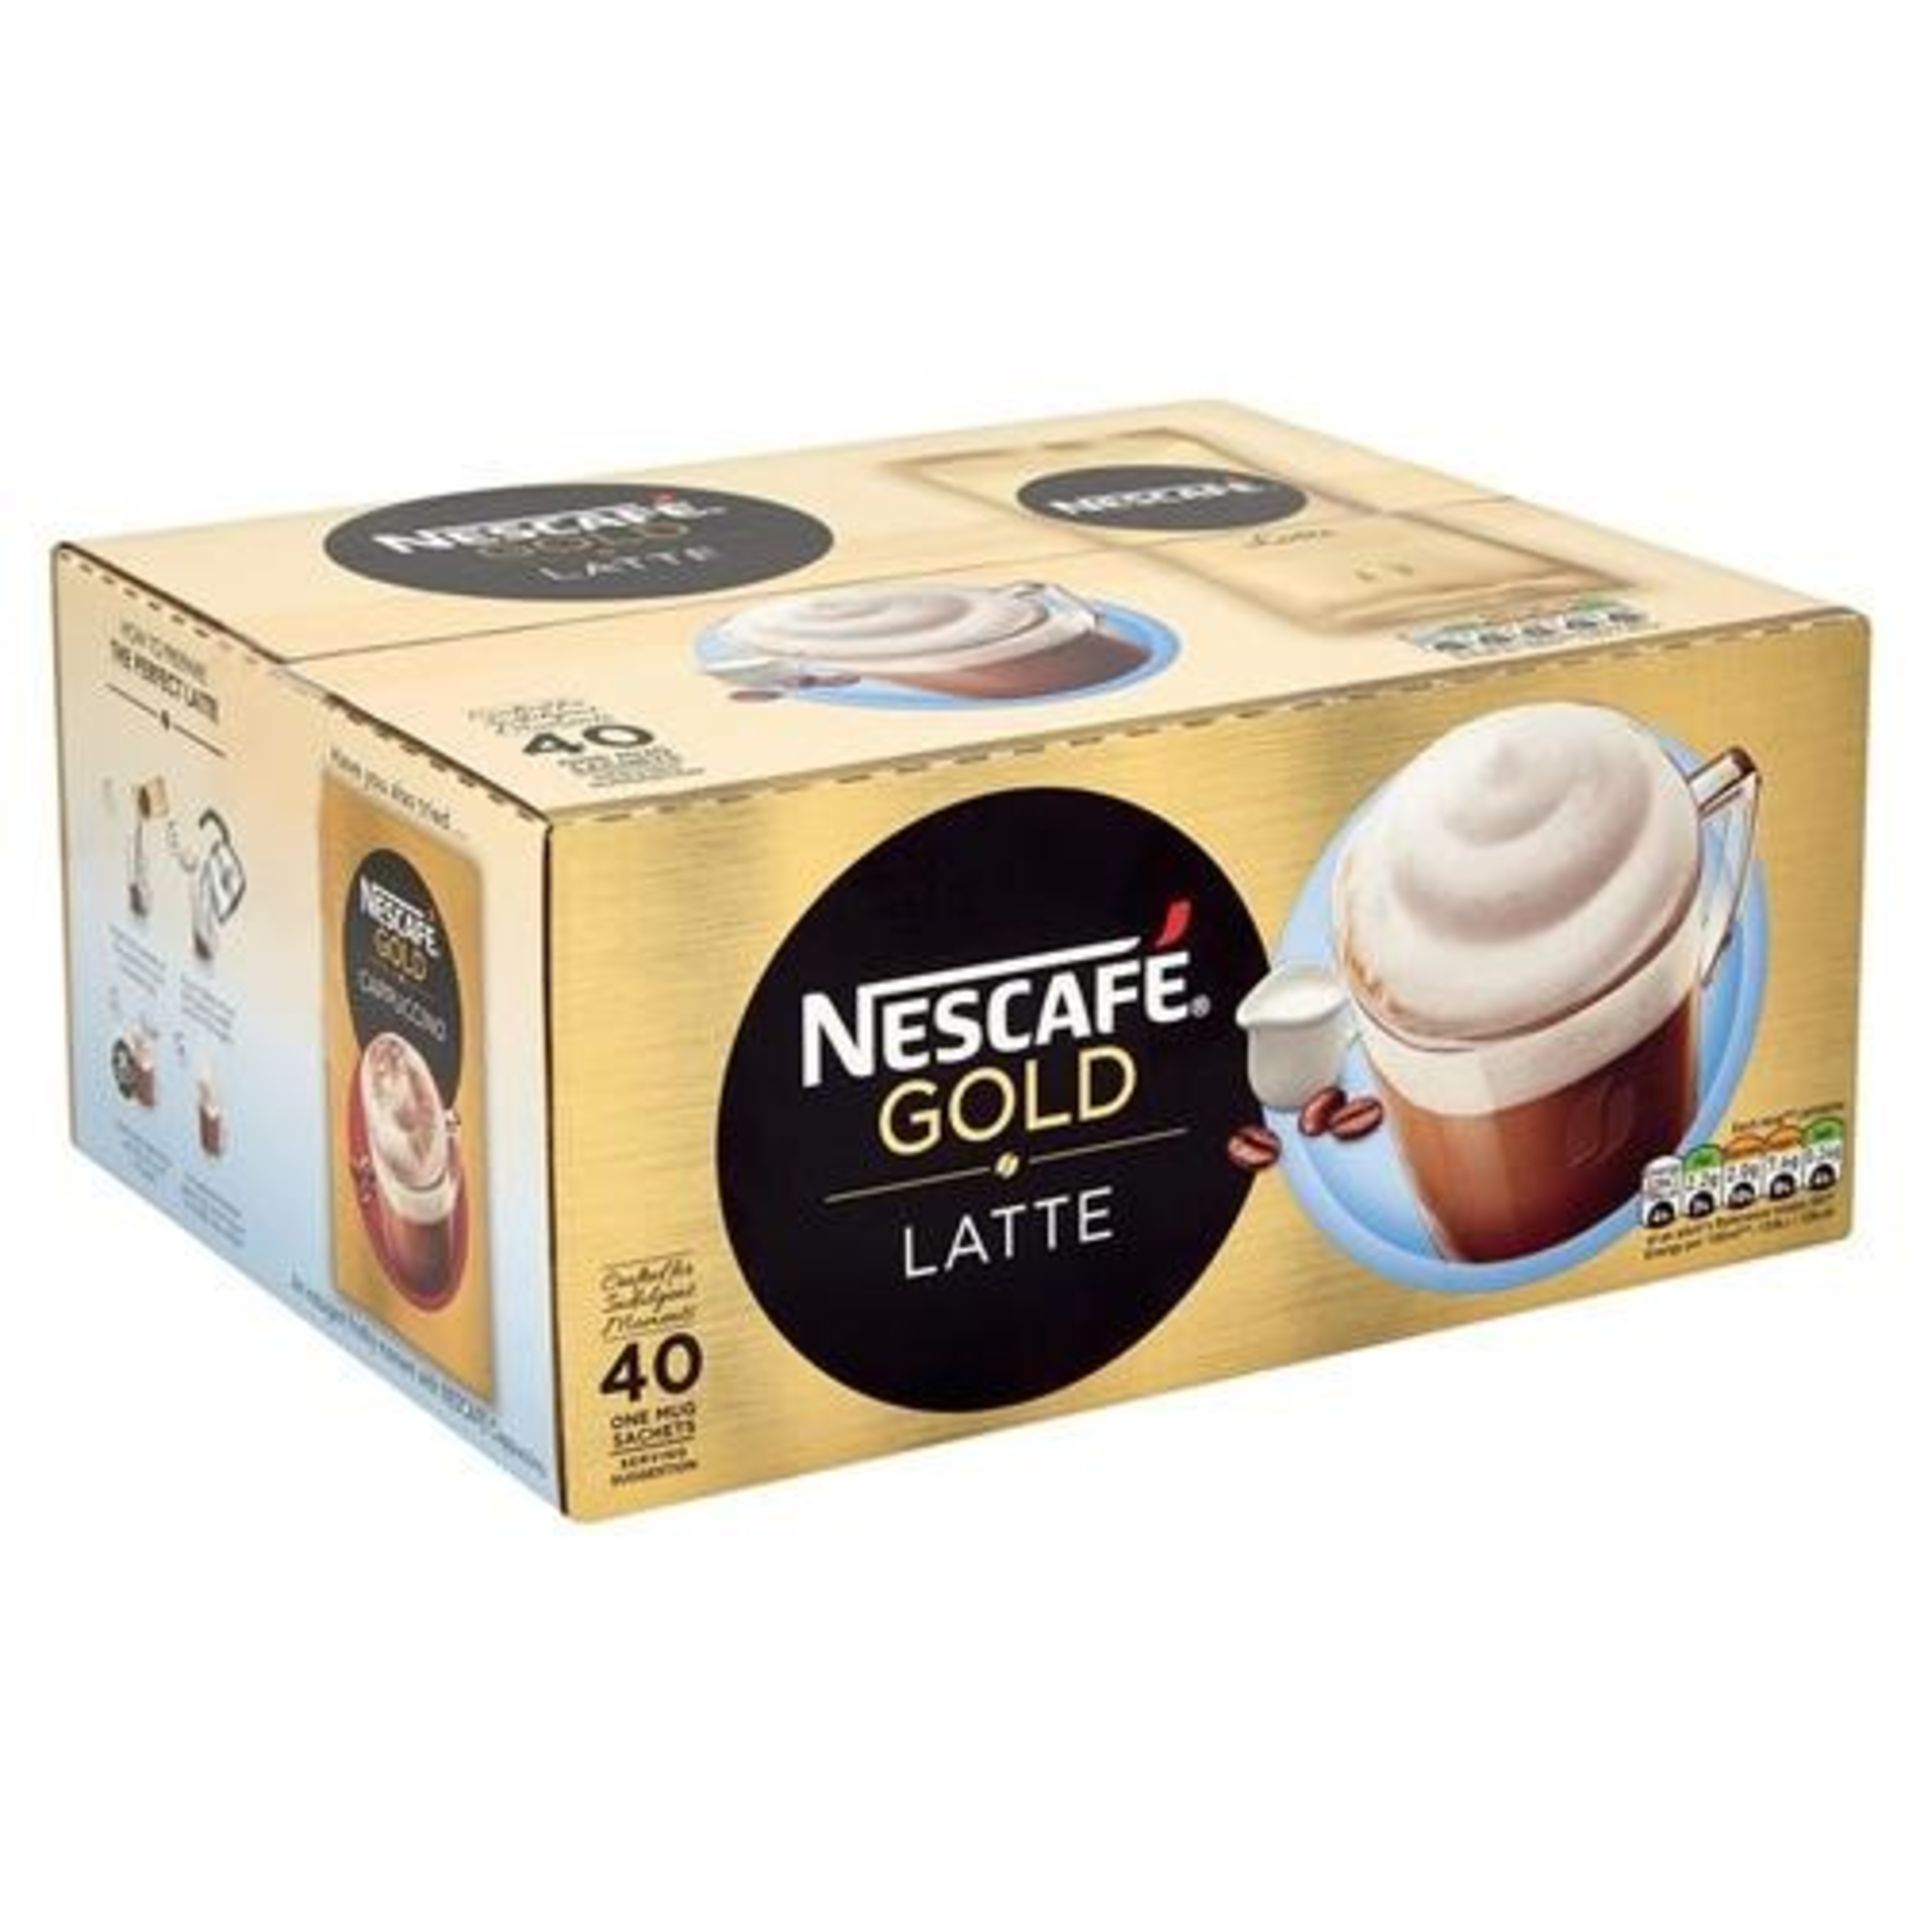 1 LOT TO CONTAIN 40 SACHETS OF NESCAFE GOLD LATTE INSTANT COFFEE / BEST BEFORE FEBRUARY 2019 /